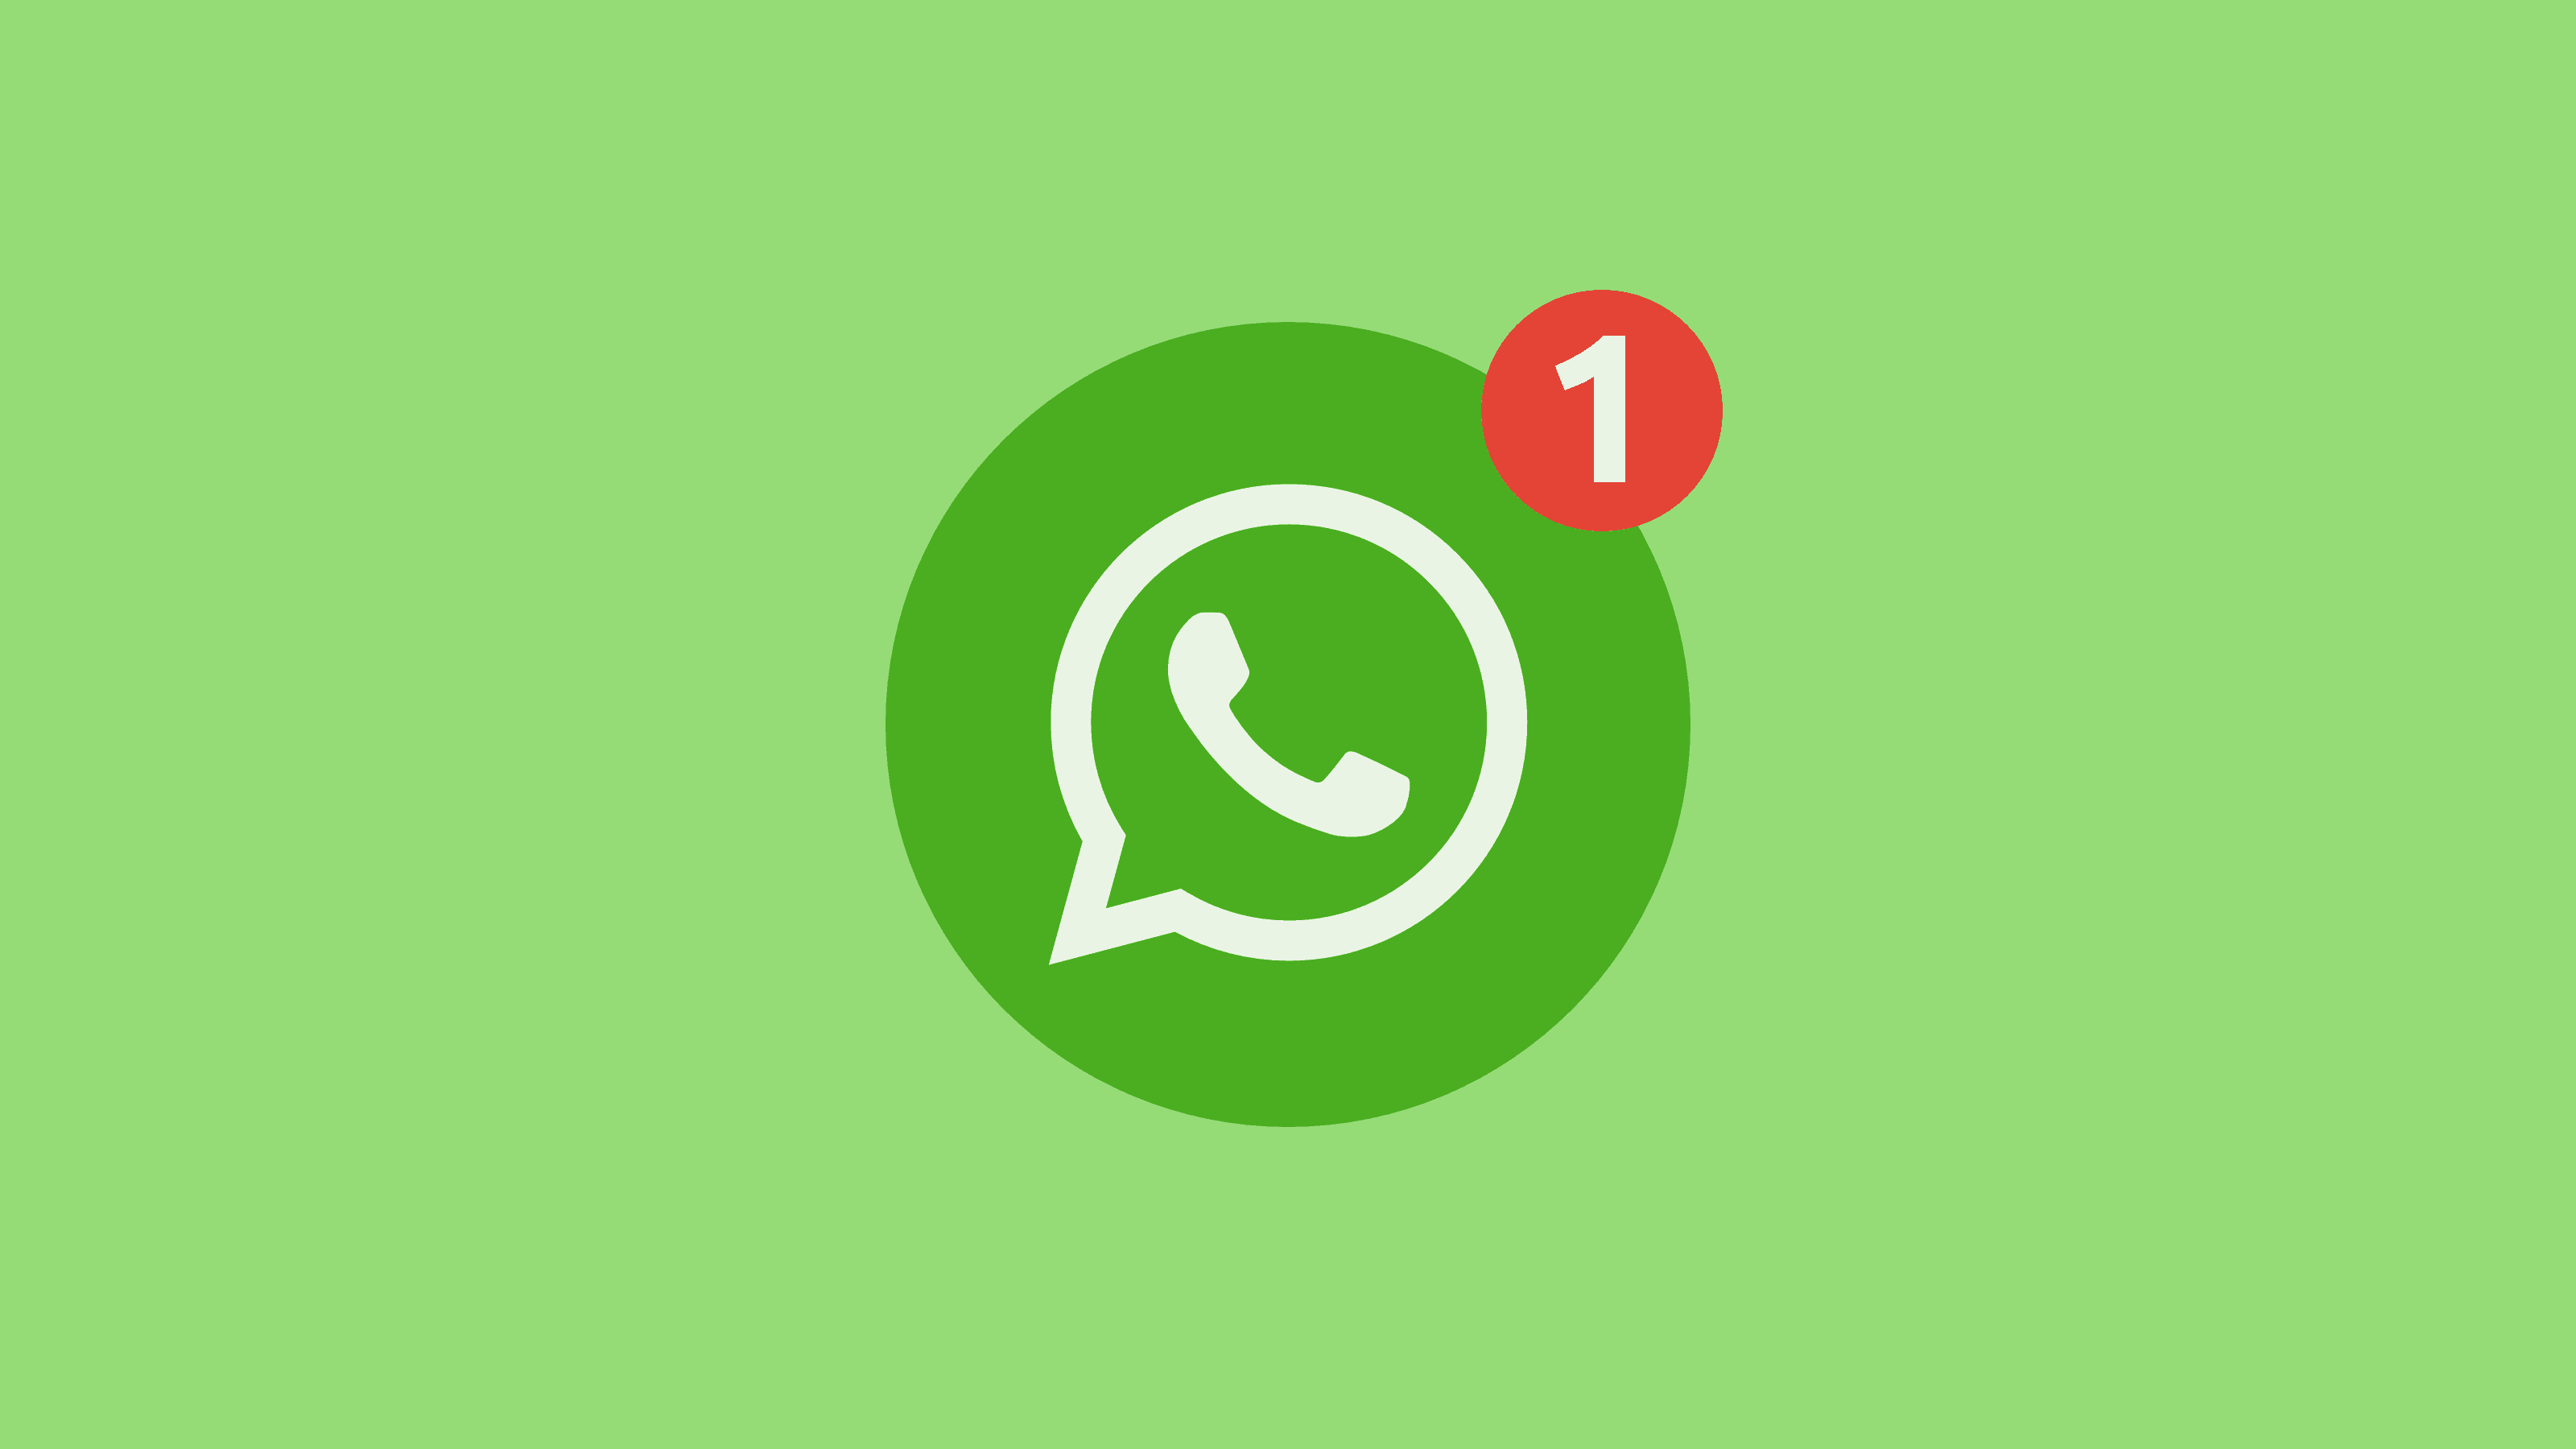 How to Use WhatsApp Without A Phone Number?